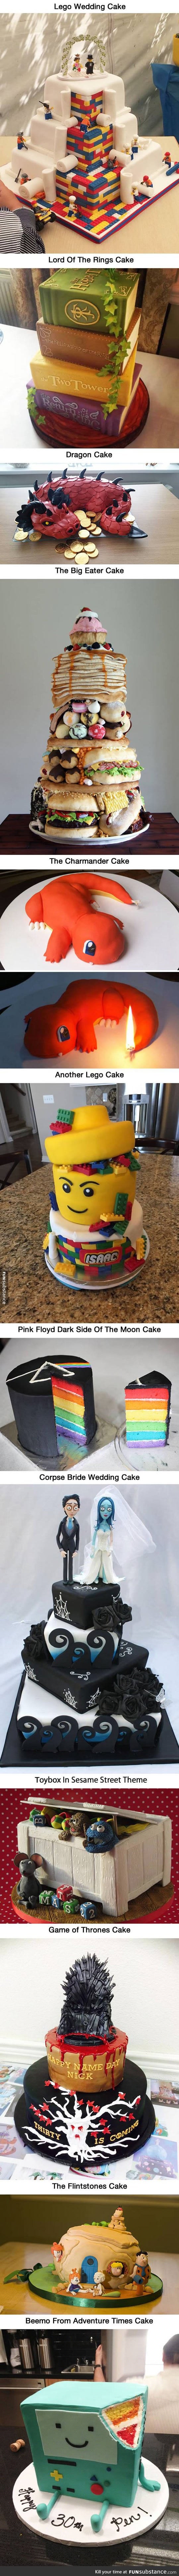 Cakes That Are Way Too Cool To Eat